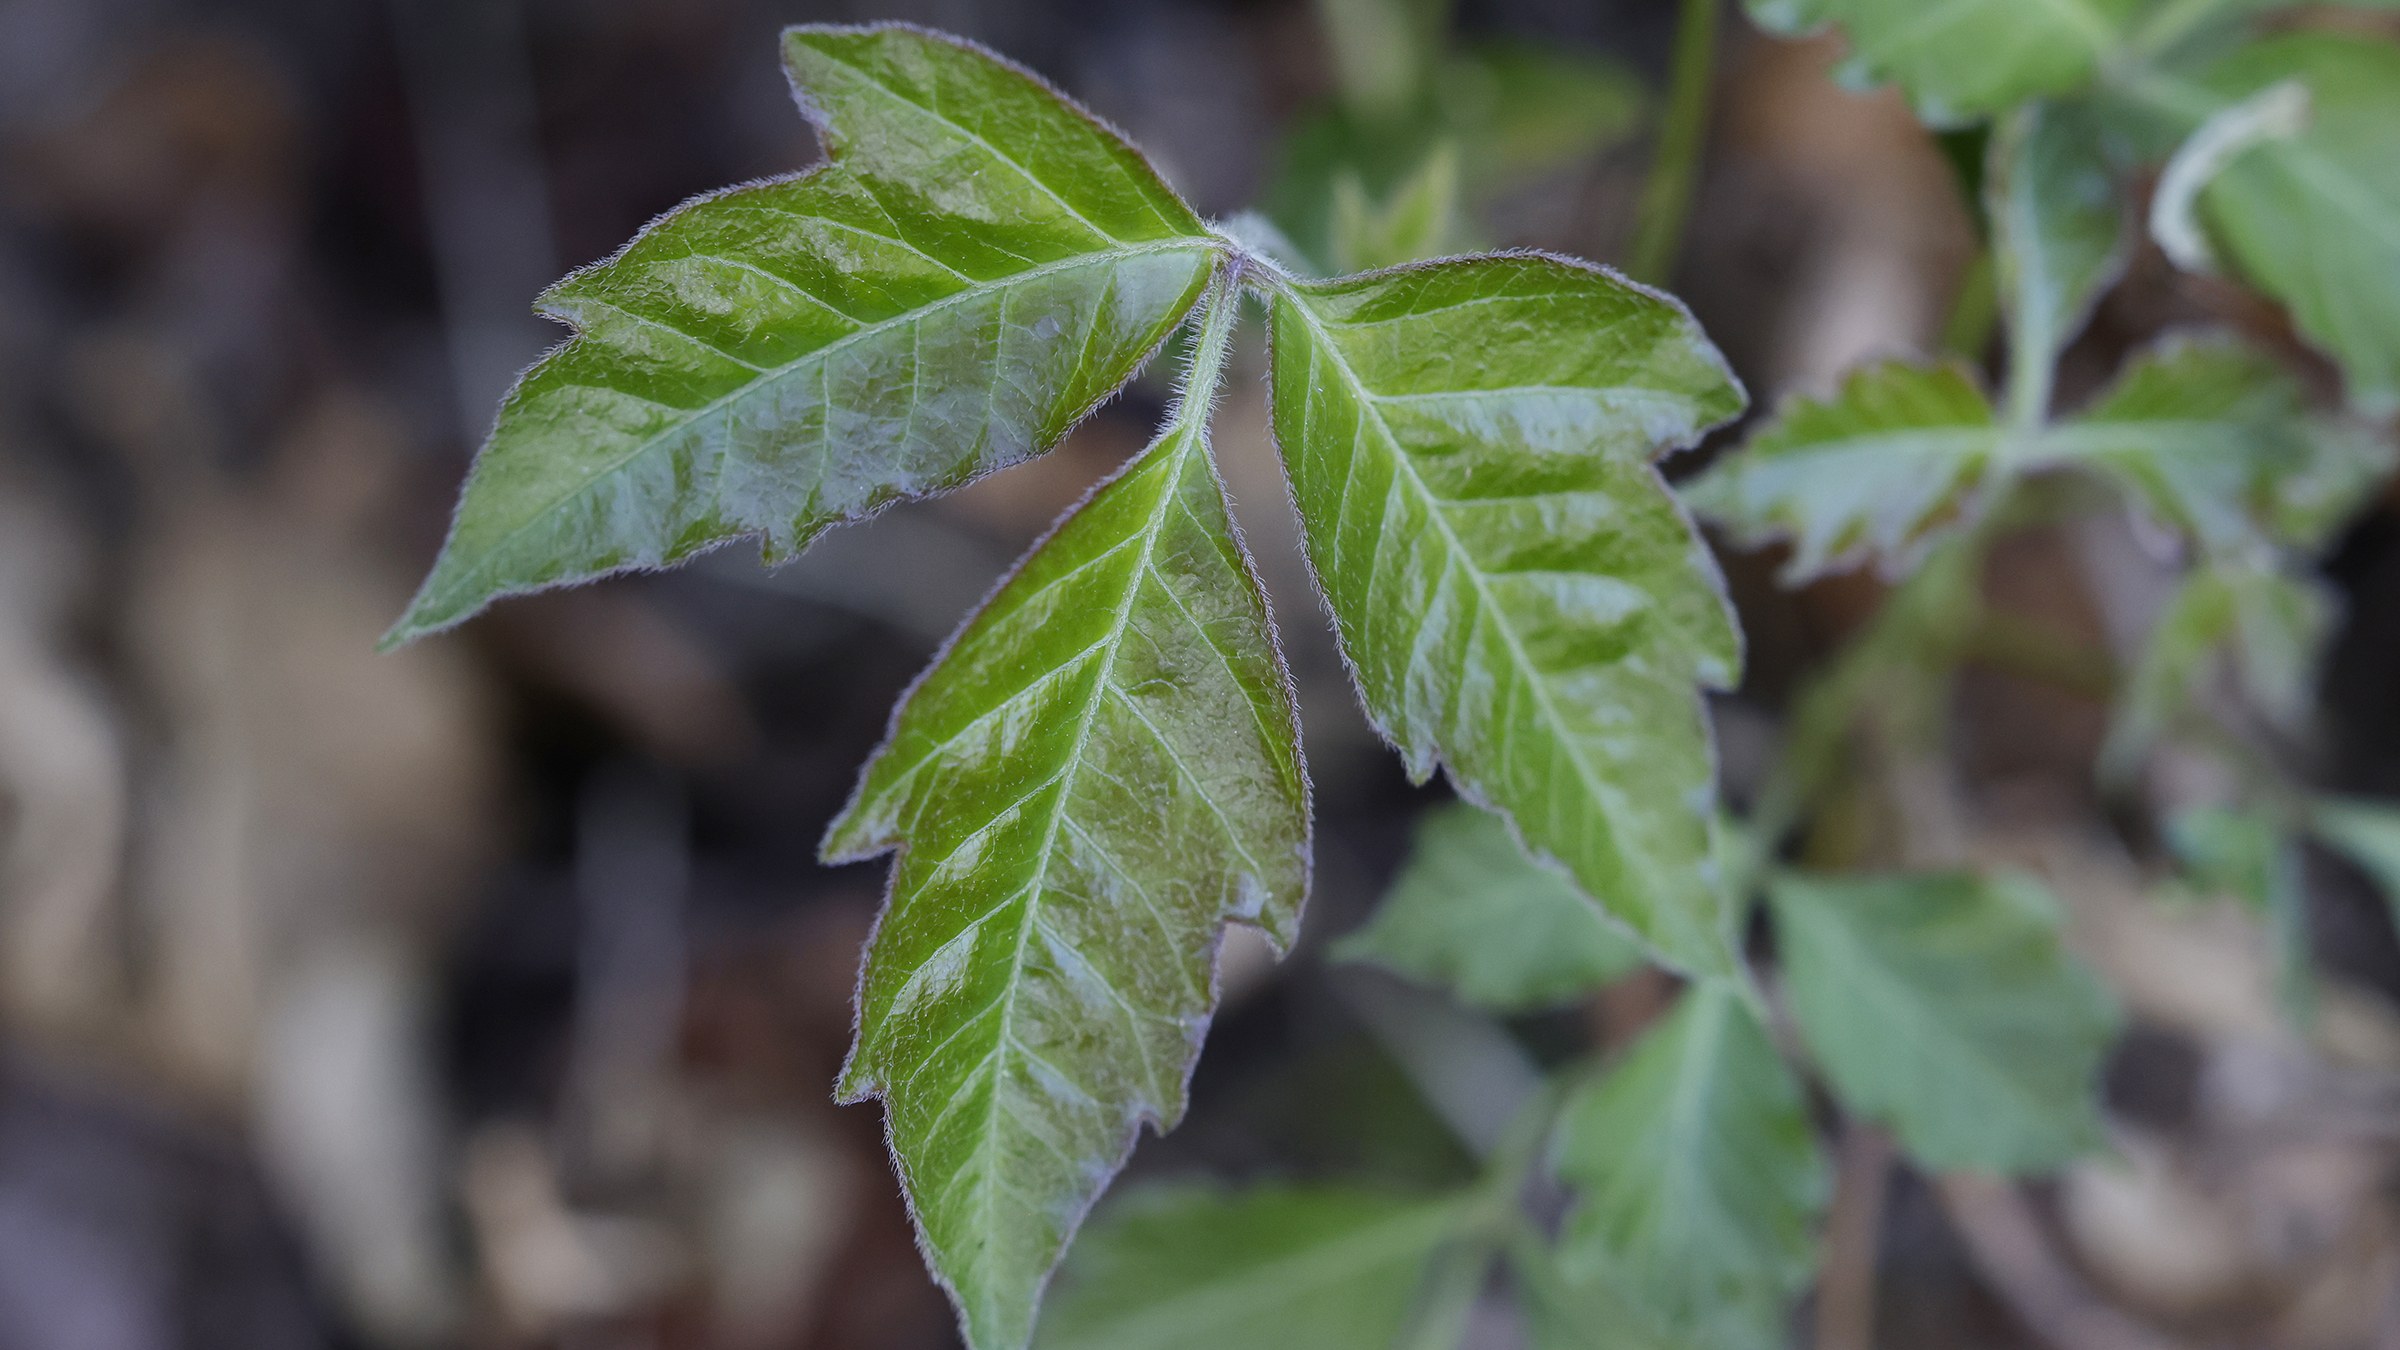 What Does Poison Ivy Look Like?